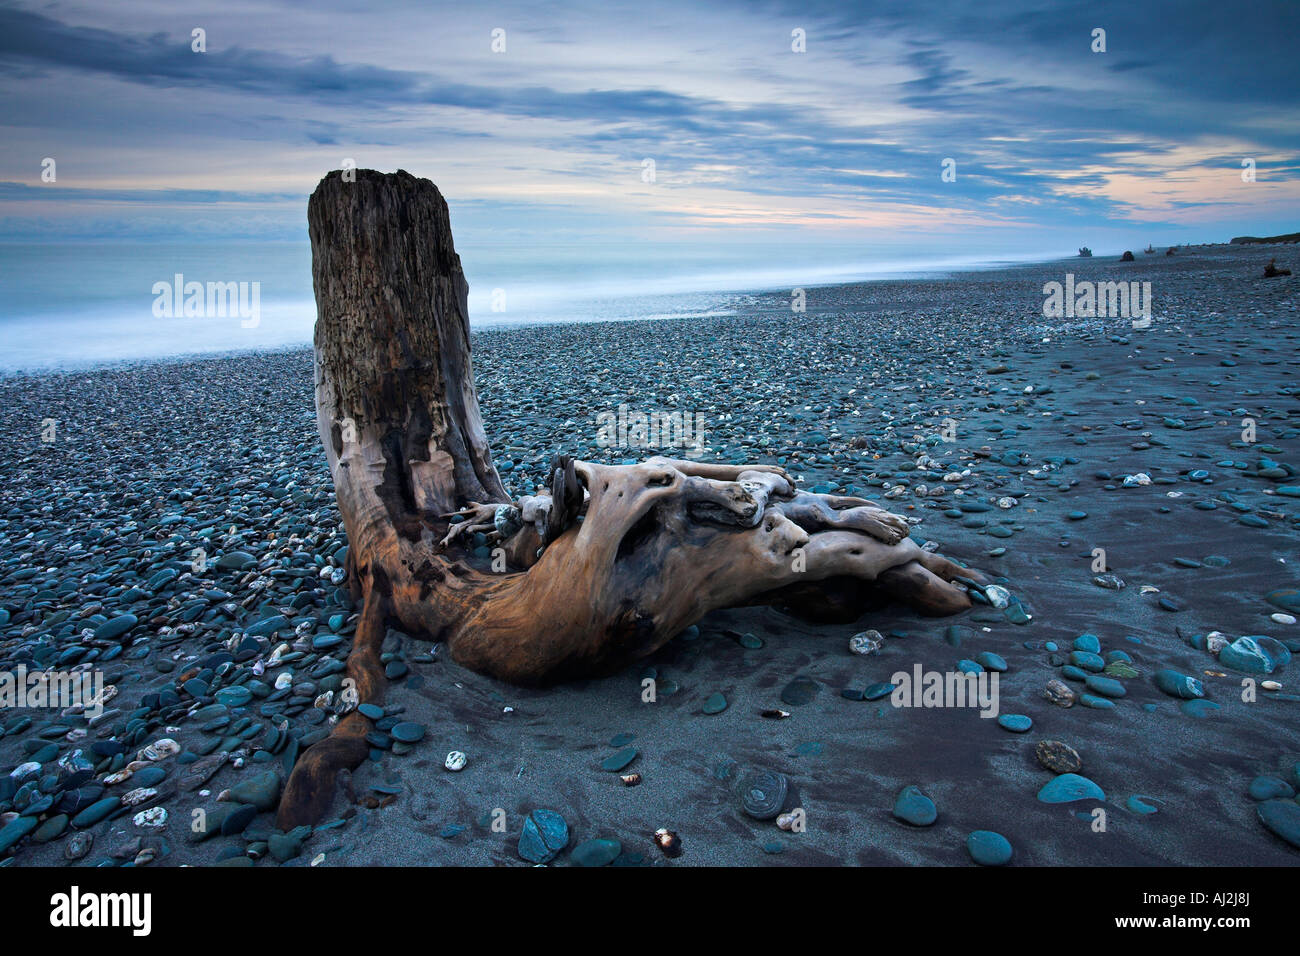 Huge piece driftwood stranded on Gillespies Beach on the wild west coast, South Island, New Zealand Stock Photo